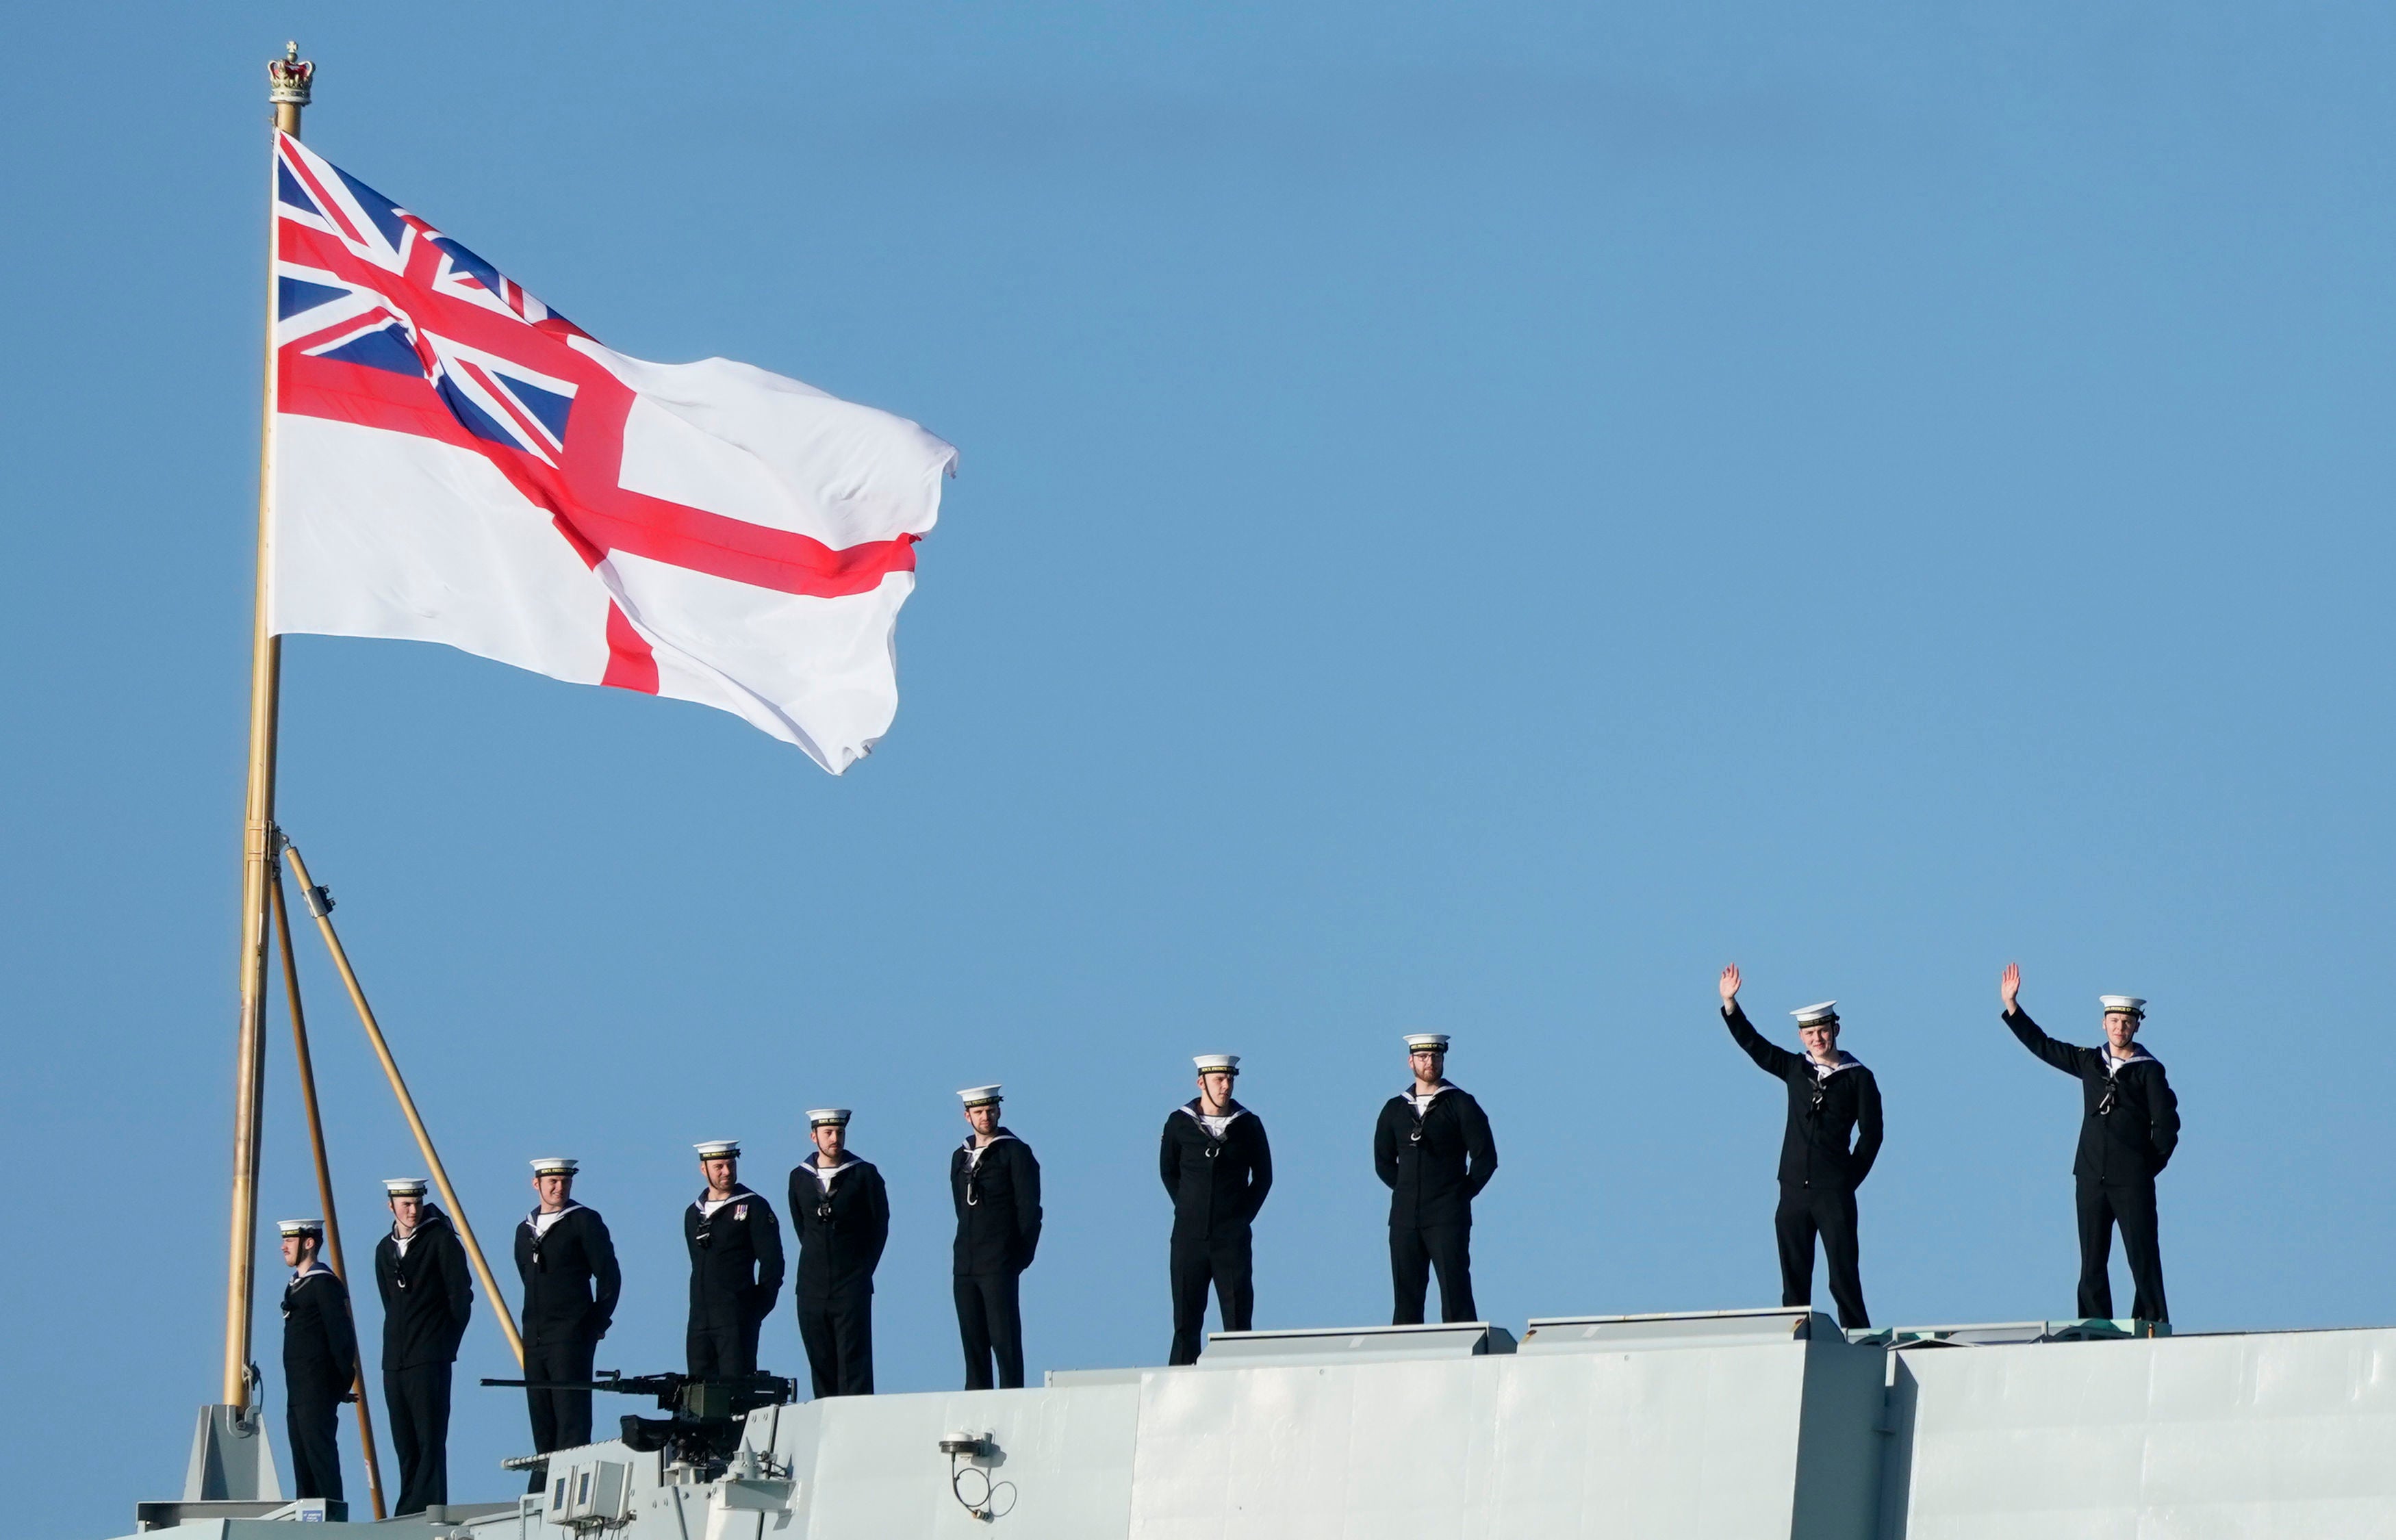 Sailors wave from the stern of the Royal Navy aircraft carrier HMS Prince of Wales as it returns to Portsmouth Naval Base following a three-month deployment to the Eastern Seaboard of the United States